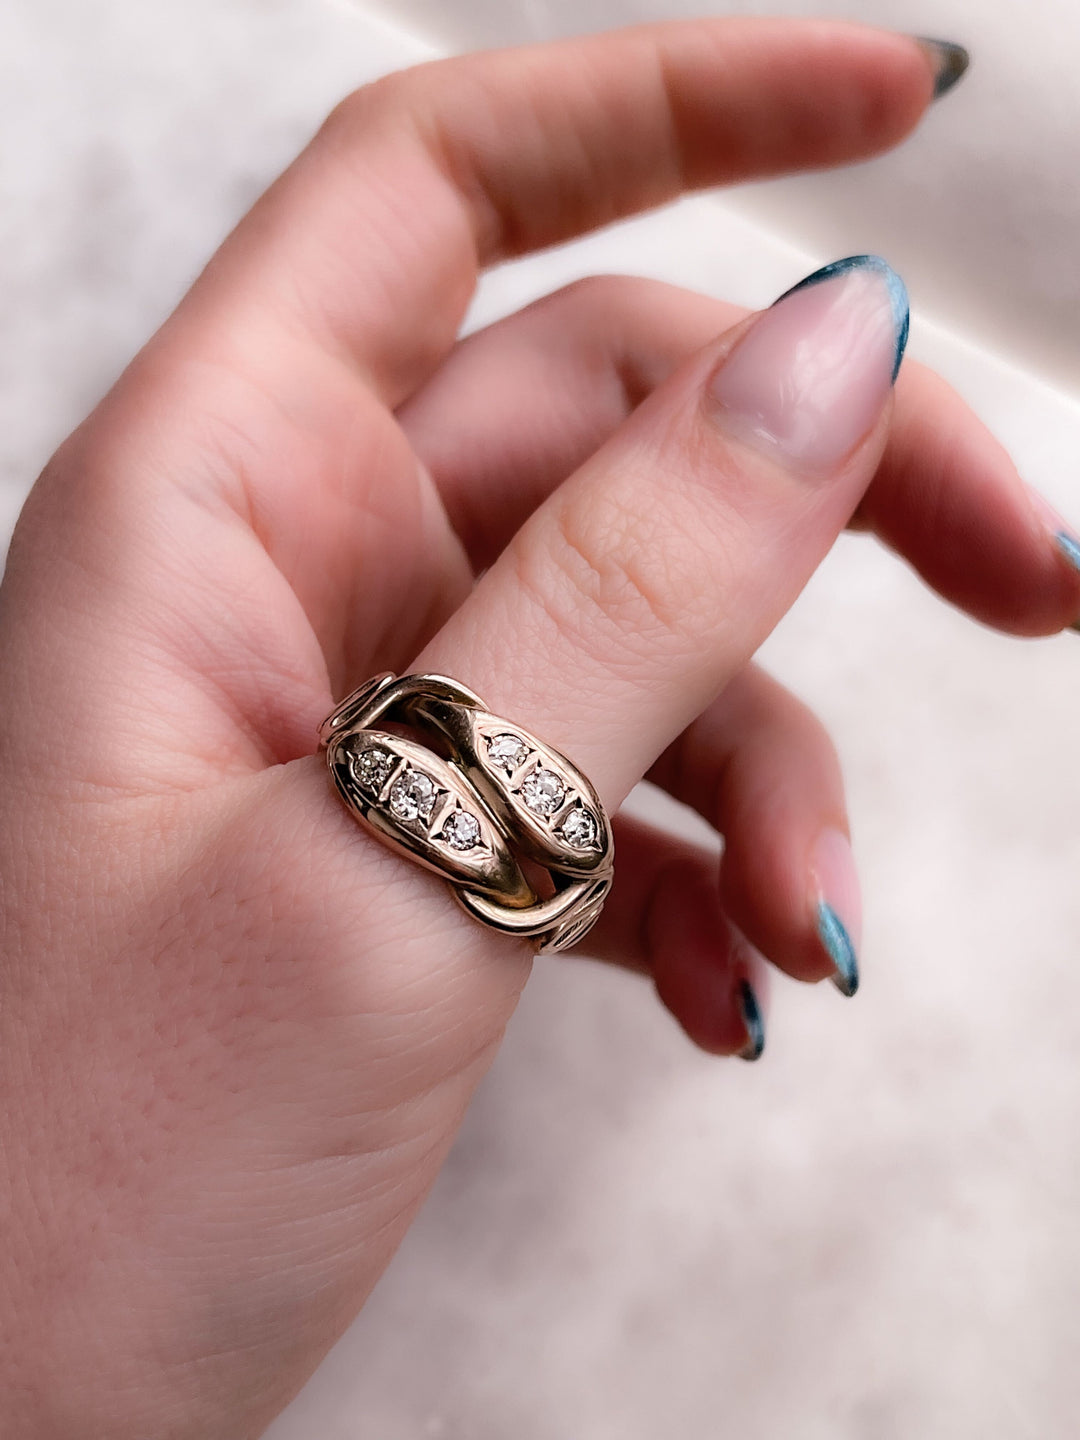 Superb Victorian Double Headed Snake Ring with Old European-Cut Diamonds